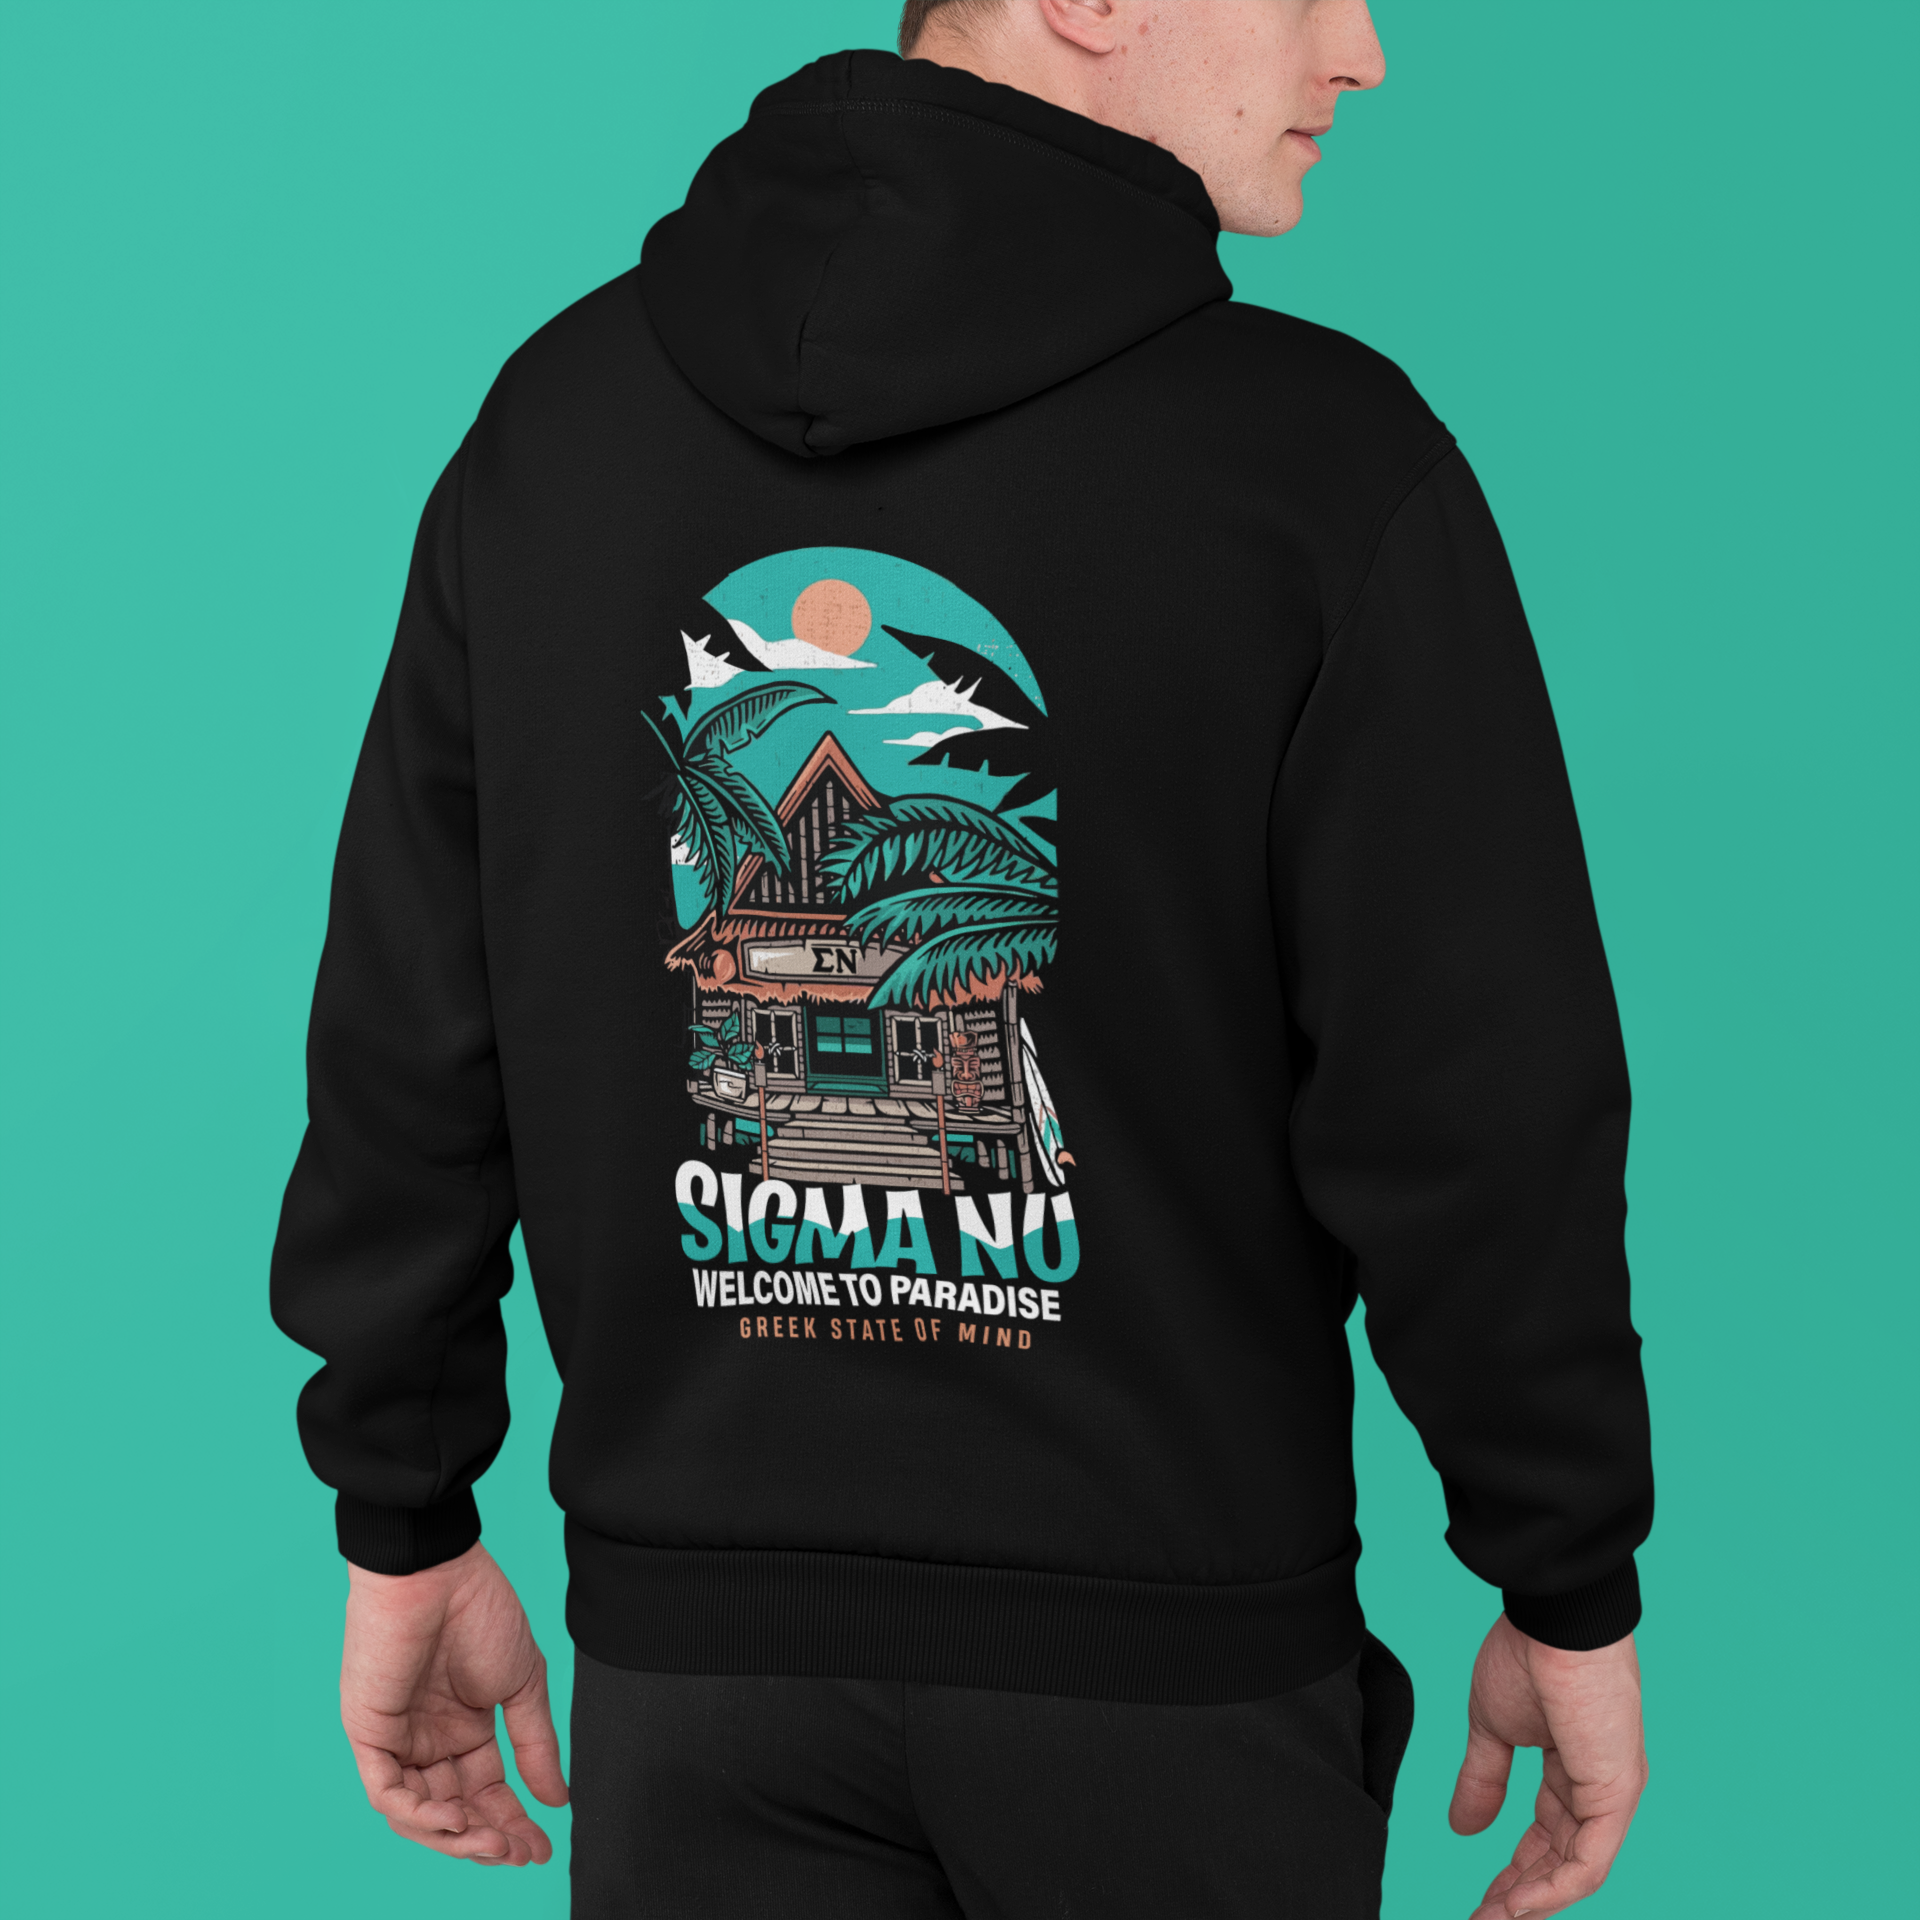 Black Sigma Nu Graphic Hoodie | Welcome to Paradise | Sigma Nu Clothing, Apparel and Merchandise model 